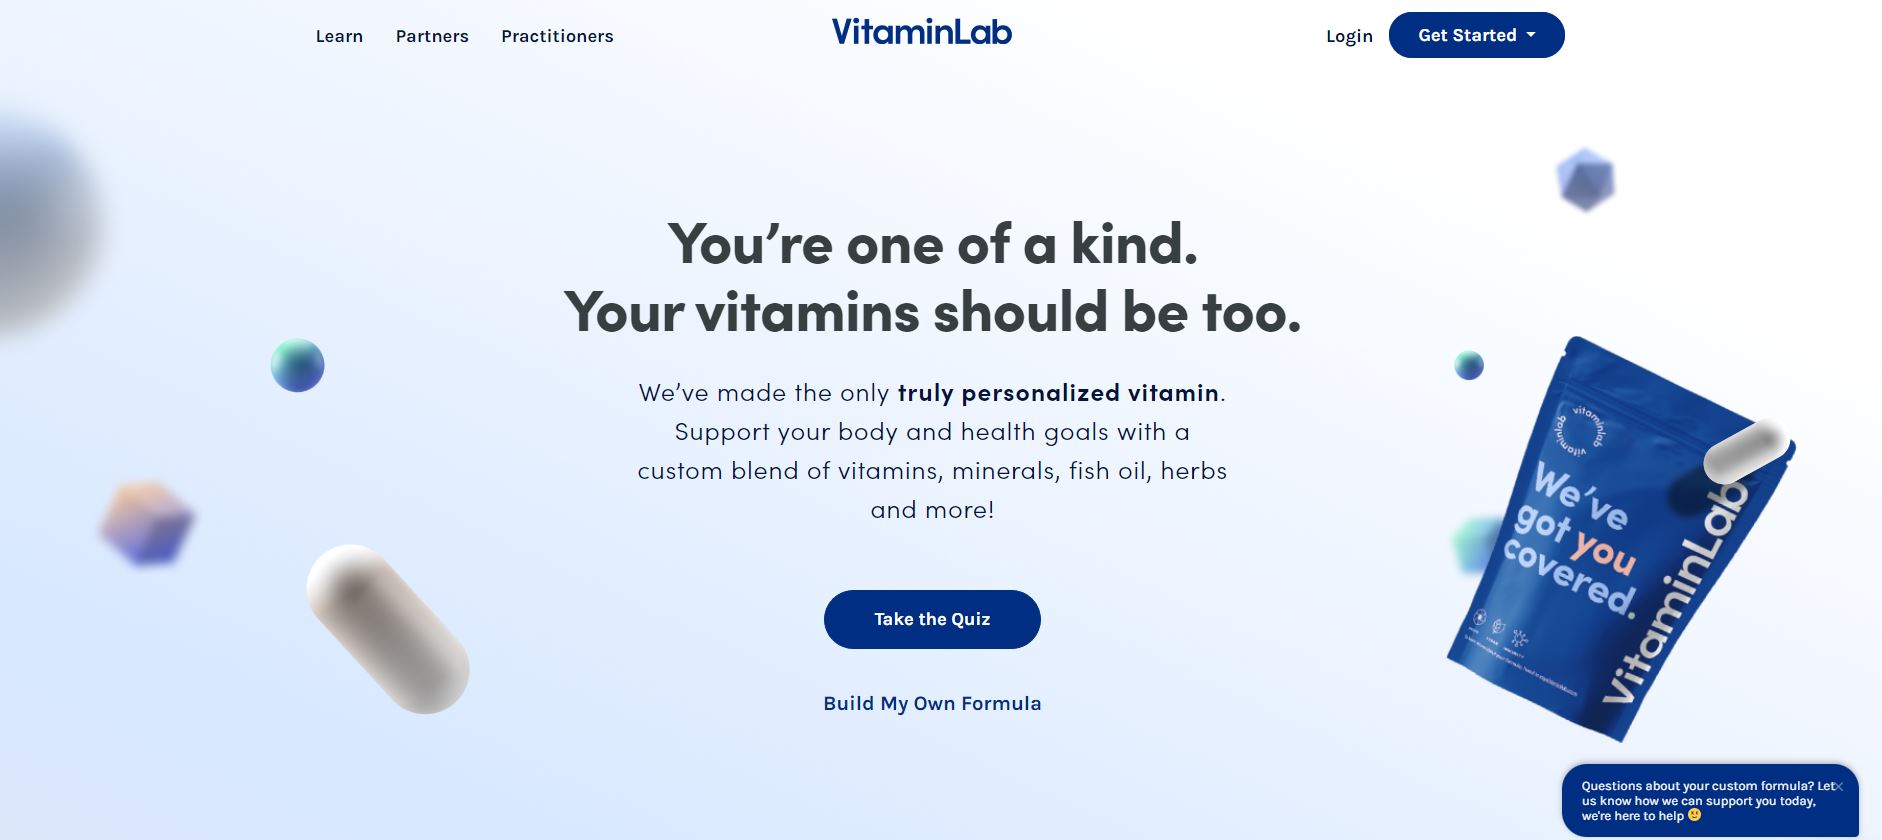 VitaminLab’s unique powder or capsule vitamin packs are designed to cover your recommended vitamin and mineral requirements